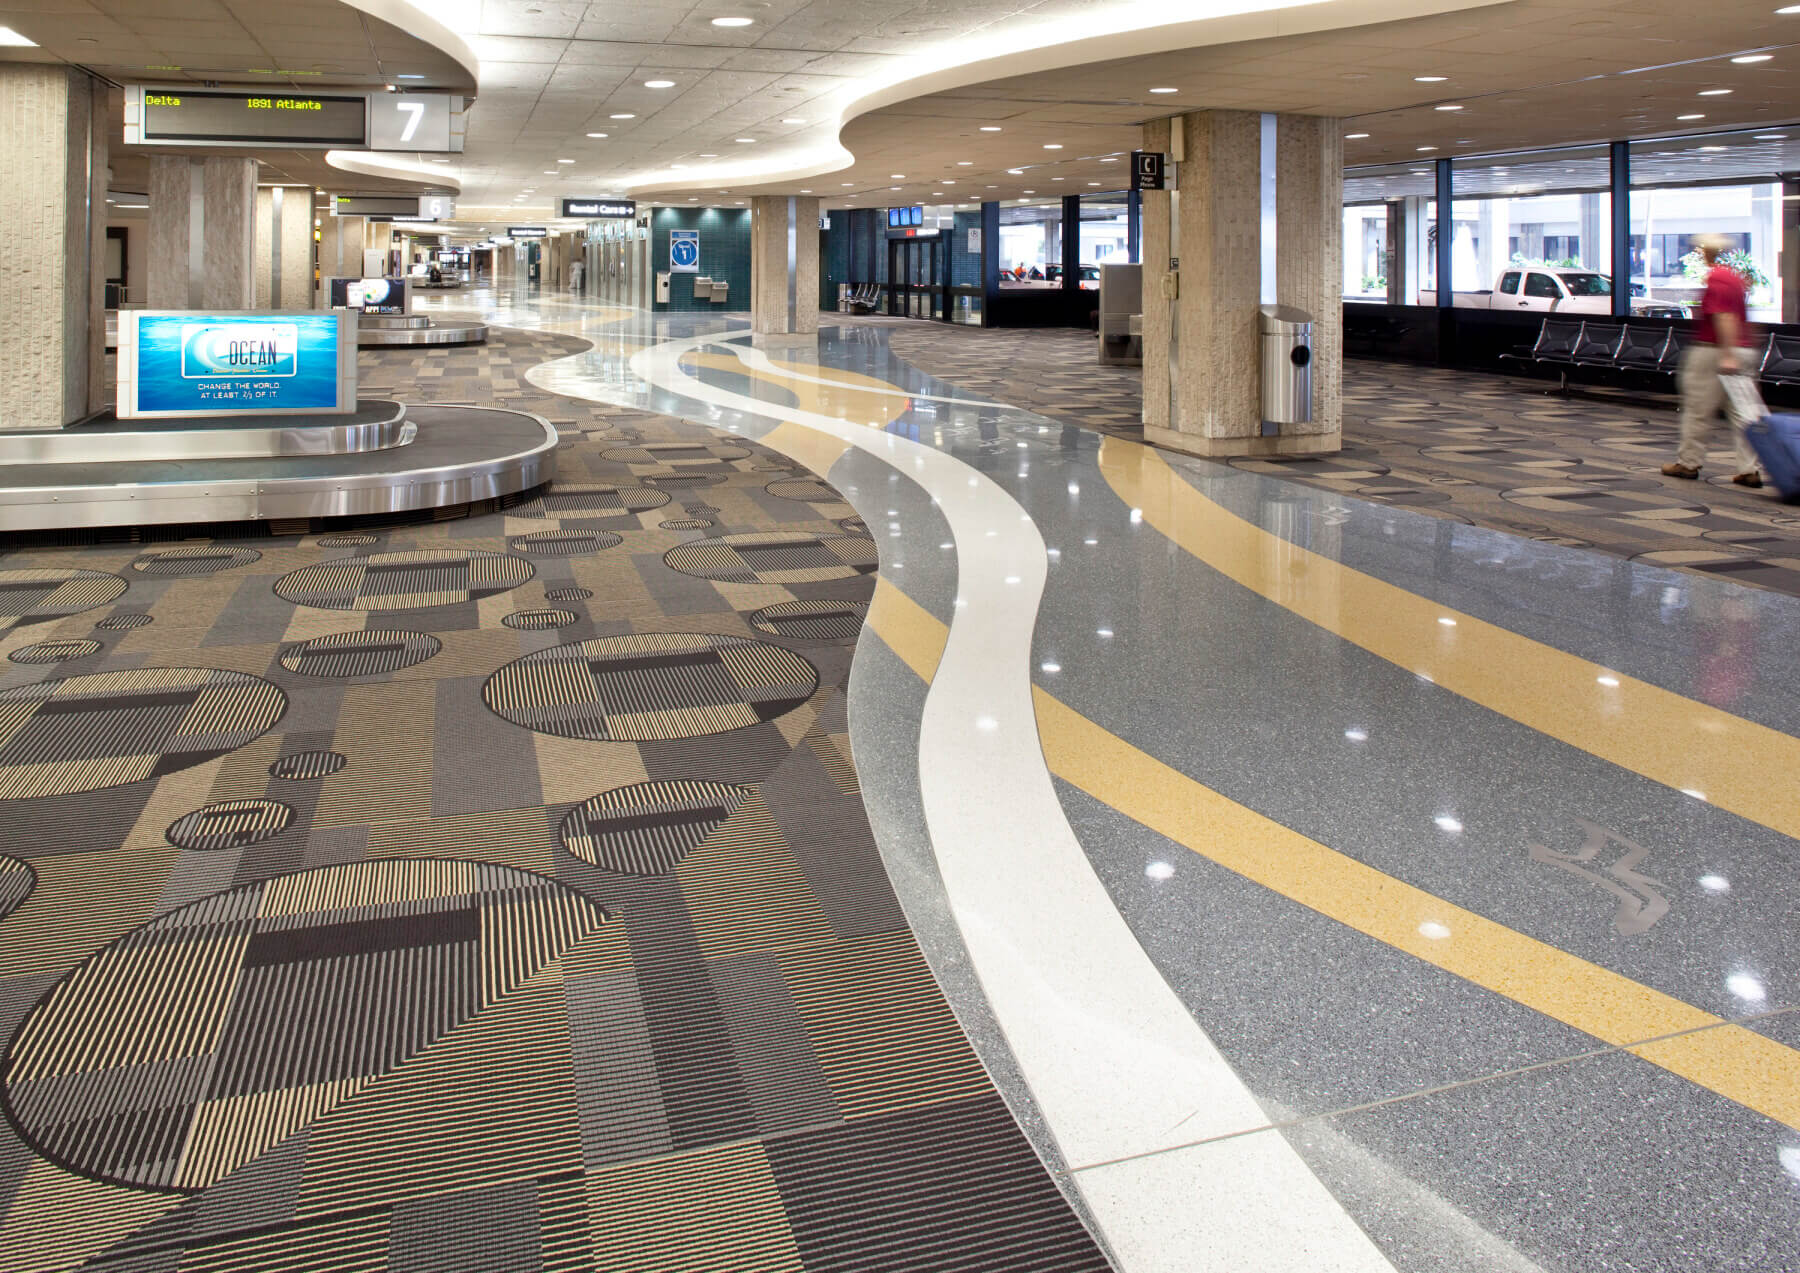 the tile and carpet pattern in the baggage claim area at Tampa International Airport